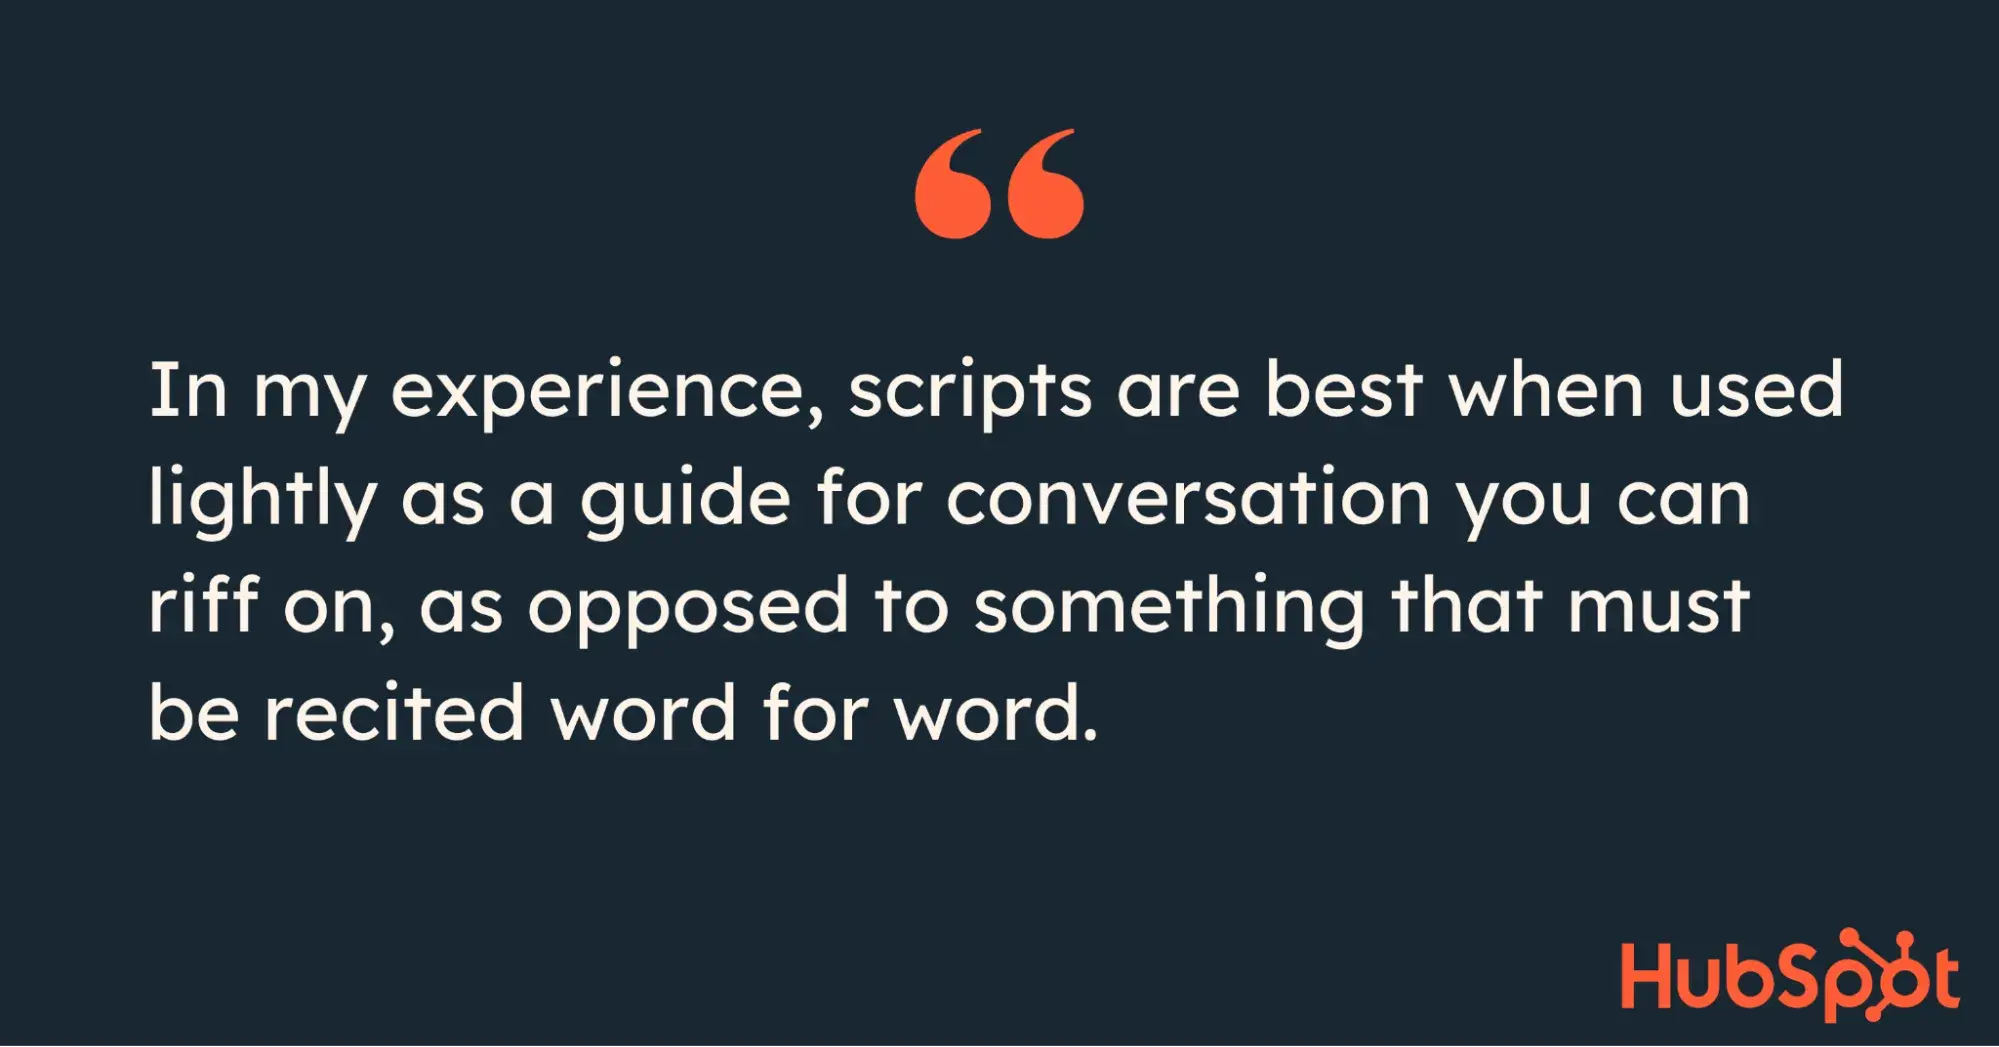 Pull quote on using positive scripting as a guide